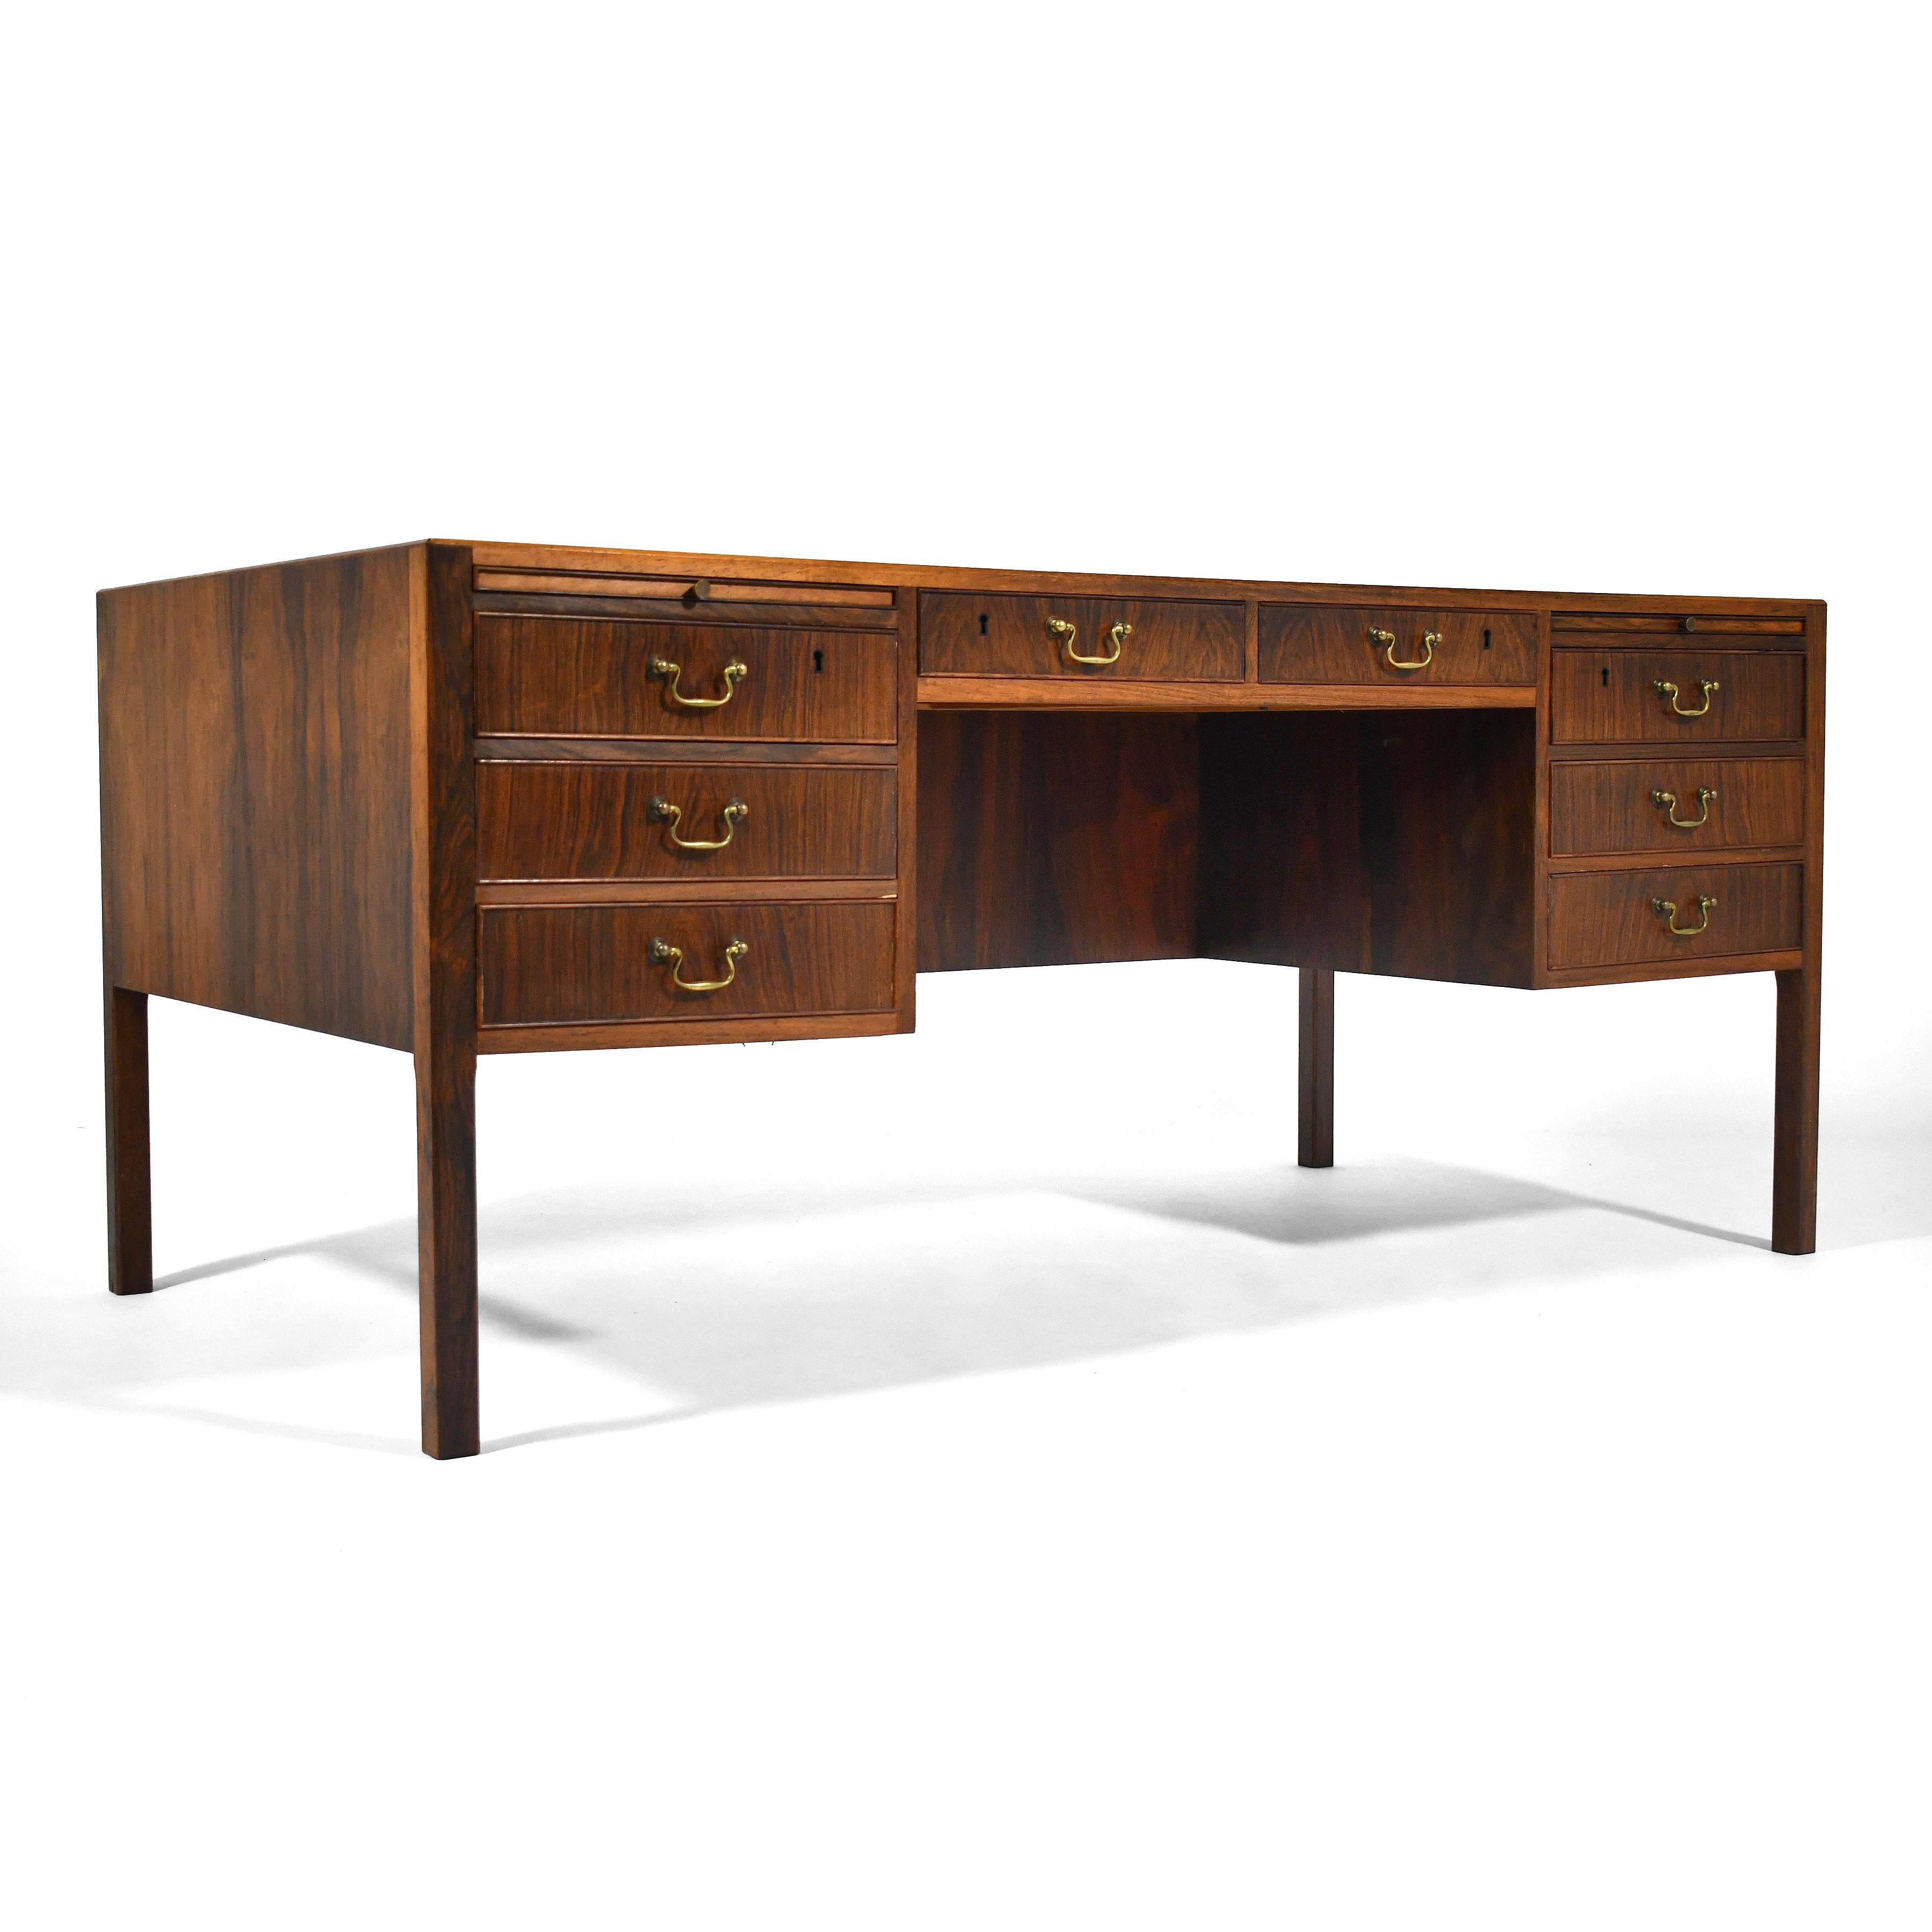 This 1950s Ole Wanscher design by A.J. Iversen is a transitional piece, combining traditional elements of a double pedestal desk with a decidedly modern approach.

The most striking feature is the beautiful, highly figured rosewood that it is clad